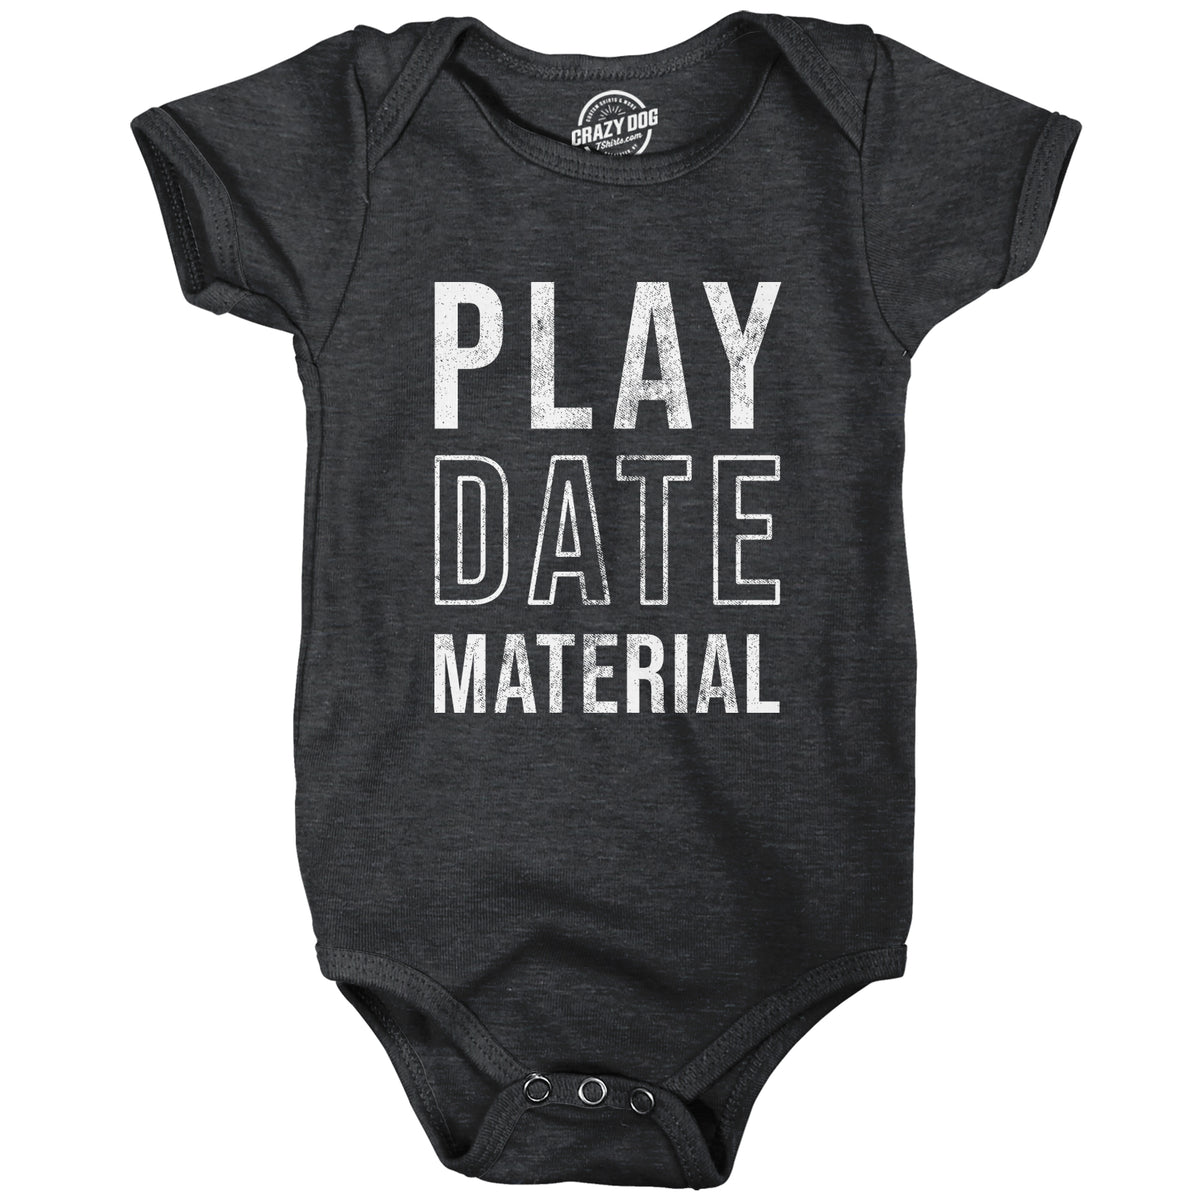 Funny Heather Black - PLAY Play Date Material Onesie Nerdy Sarcastic Tee